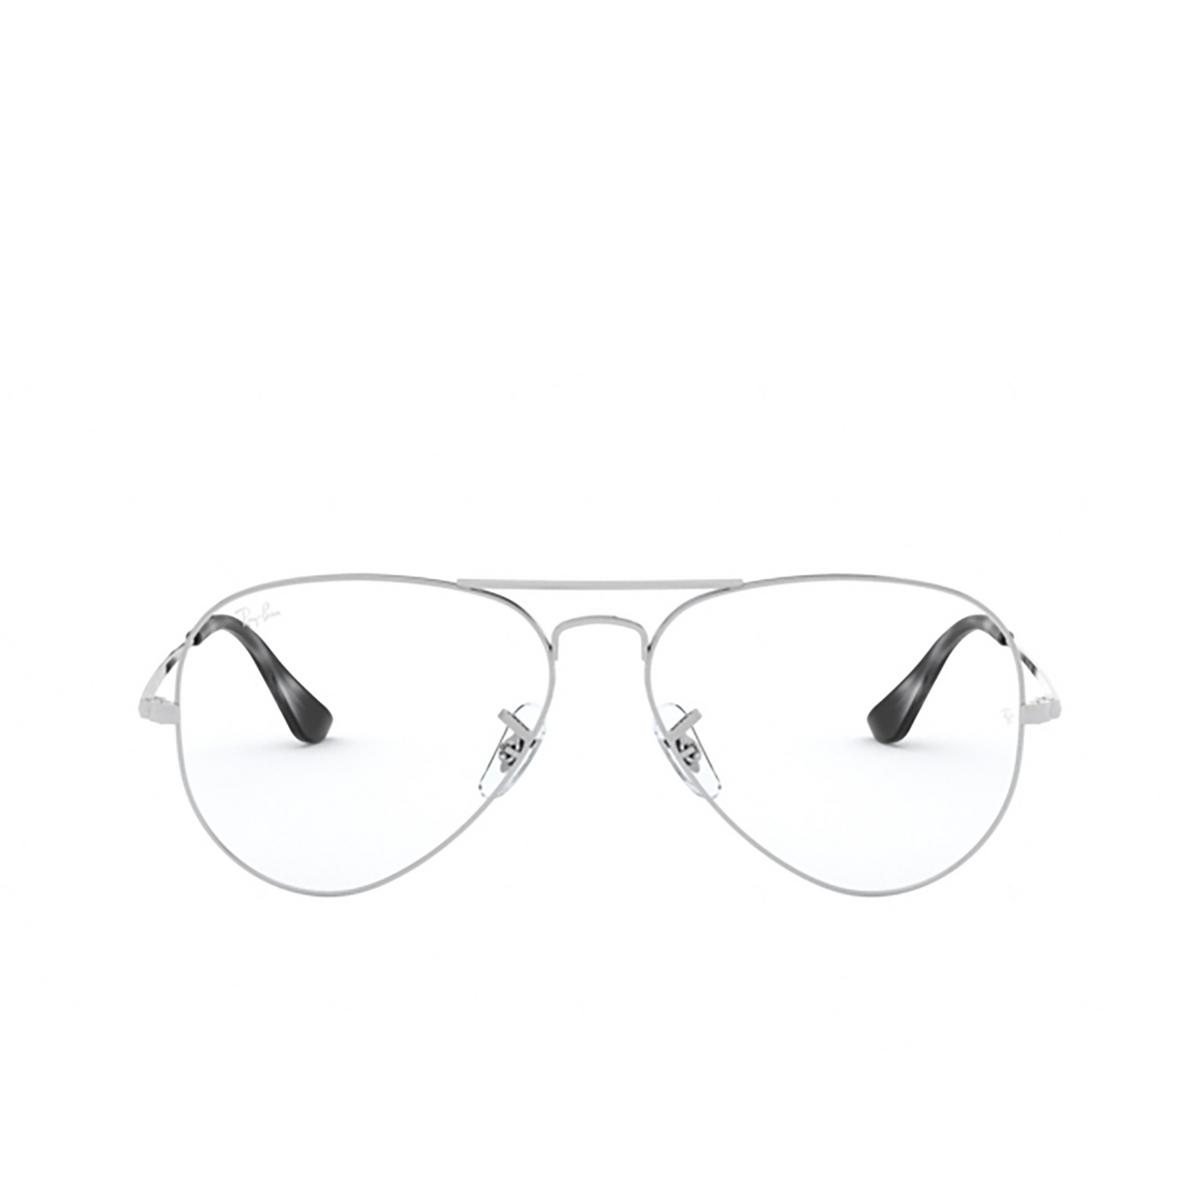 Ray-Ban® Aviator Eyeglasses: Aviator RX6489 color Silver 2501 - front view.